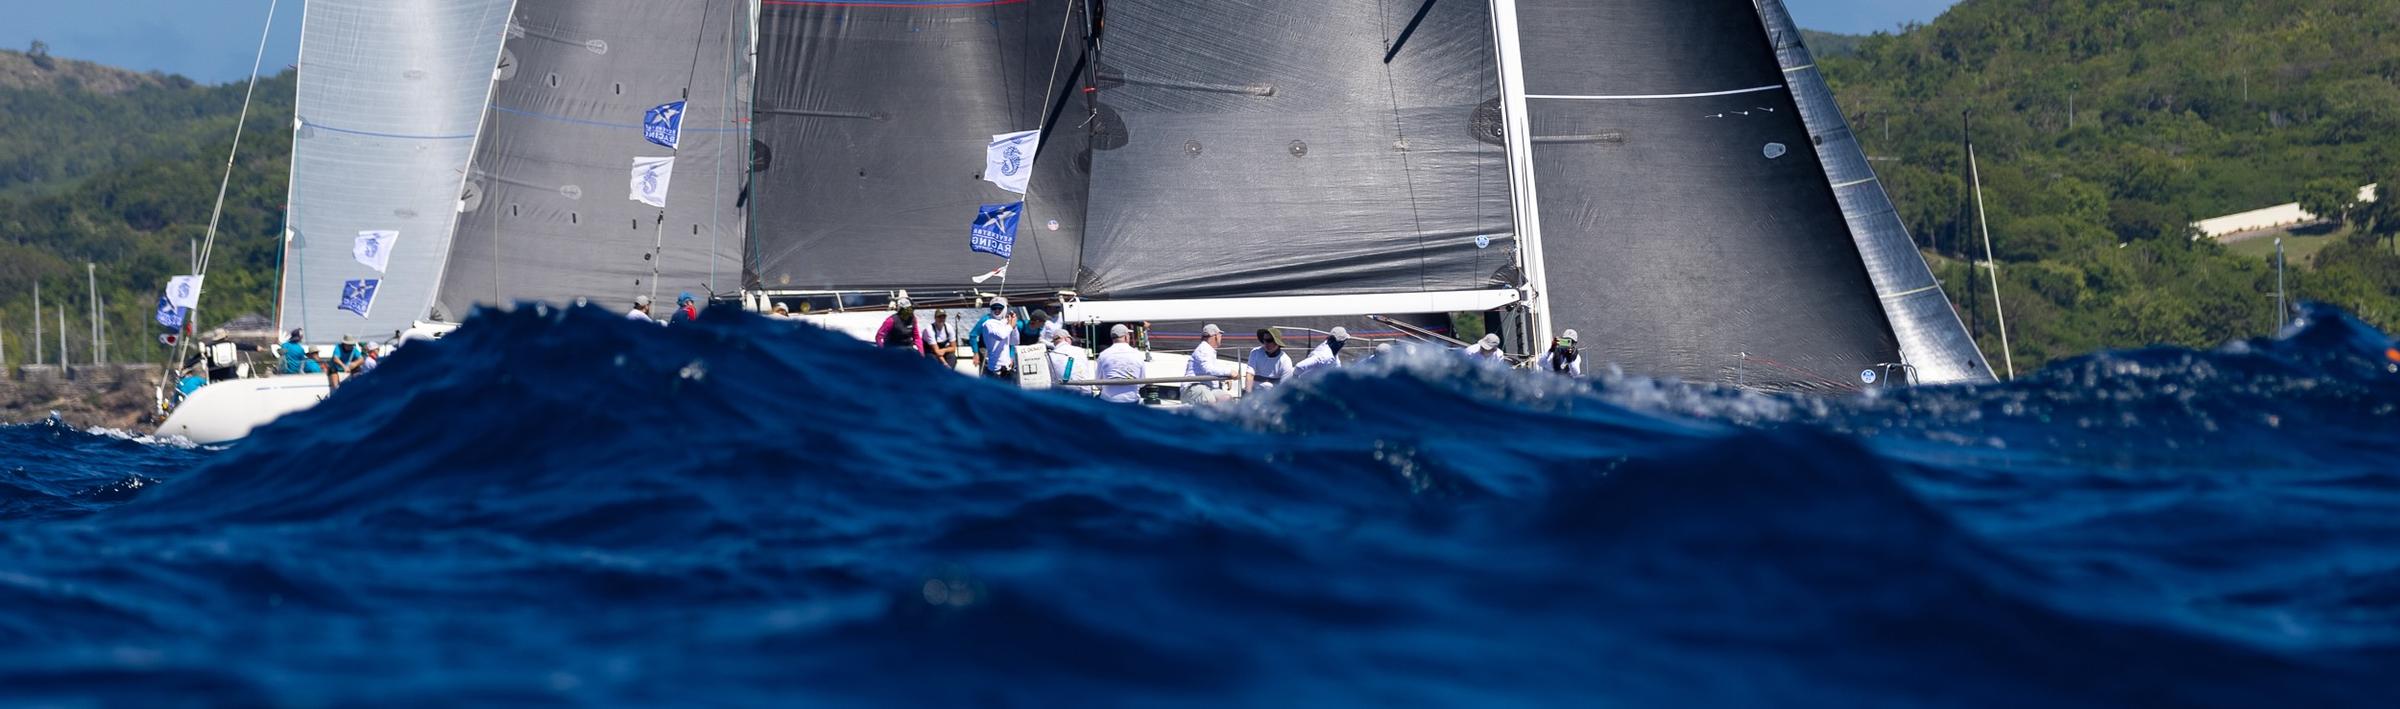 The Royal Ocean Racing Club commemorates the start of its centenary in 2025 with a mouth-watering Caribbean Programme for January and February, 2025.